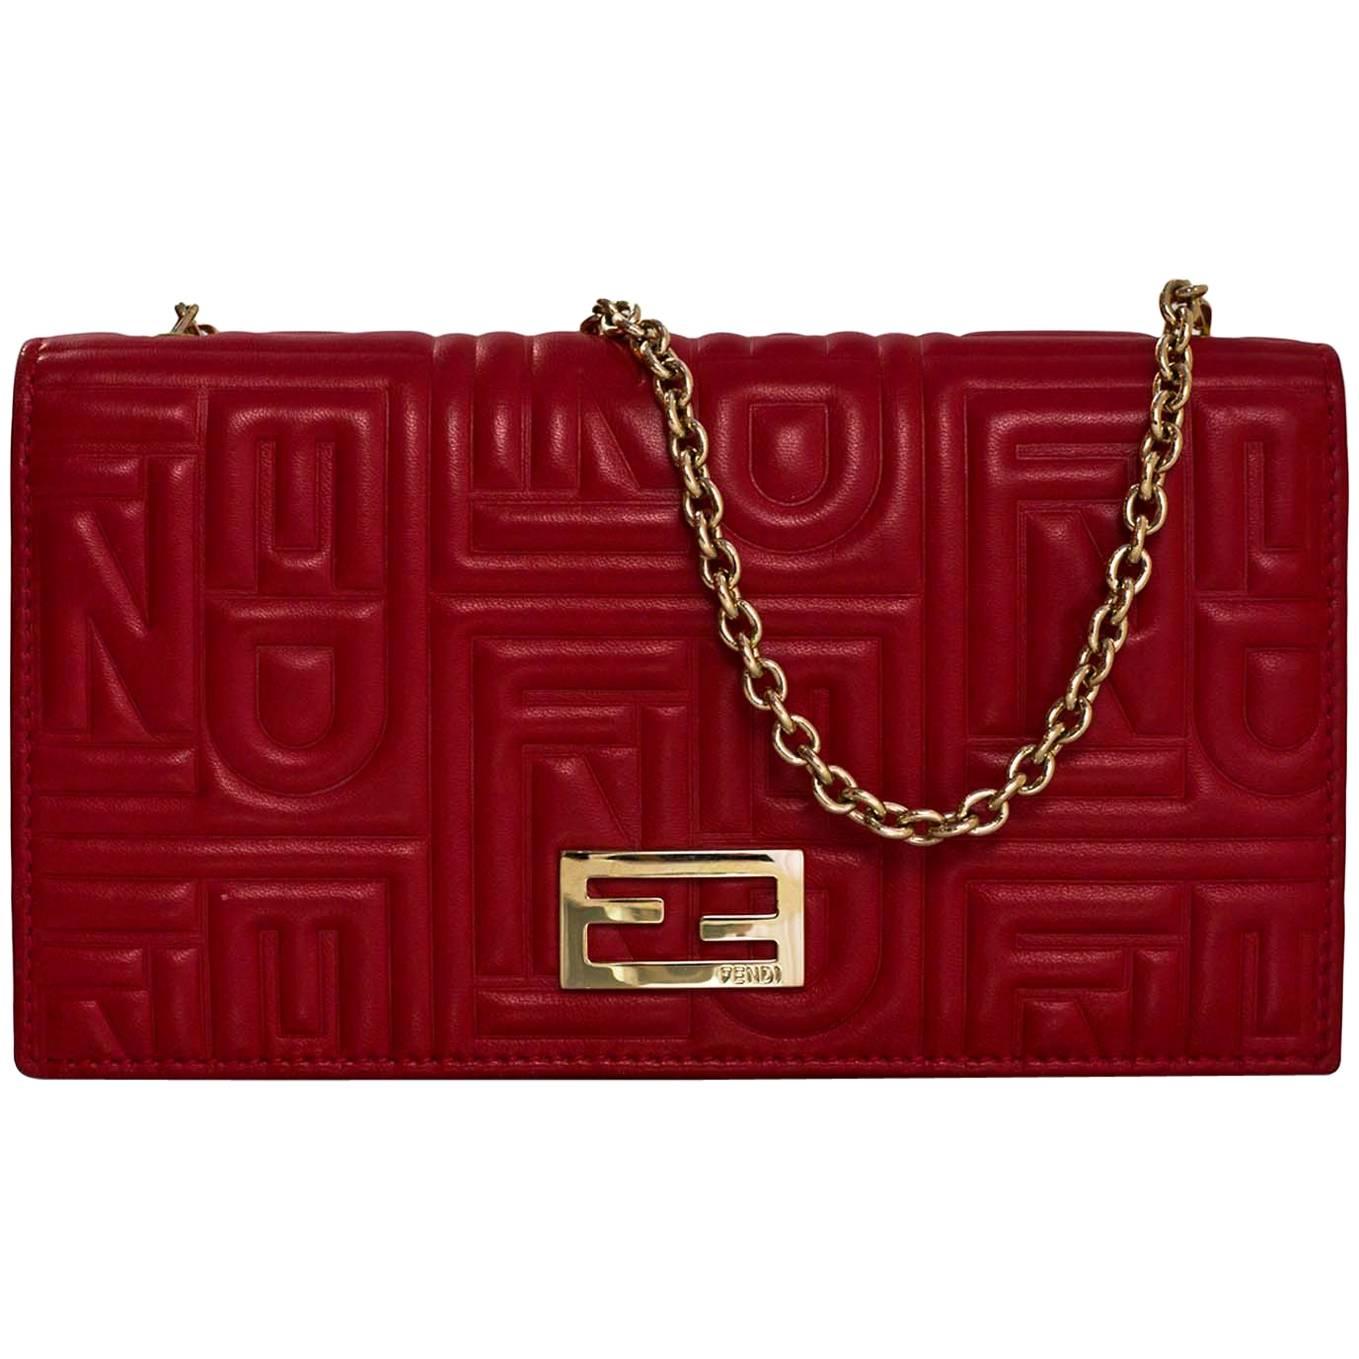 Fendi Red Leather Embossed Logo Chain Wallet WOC Bag